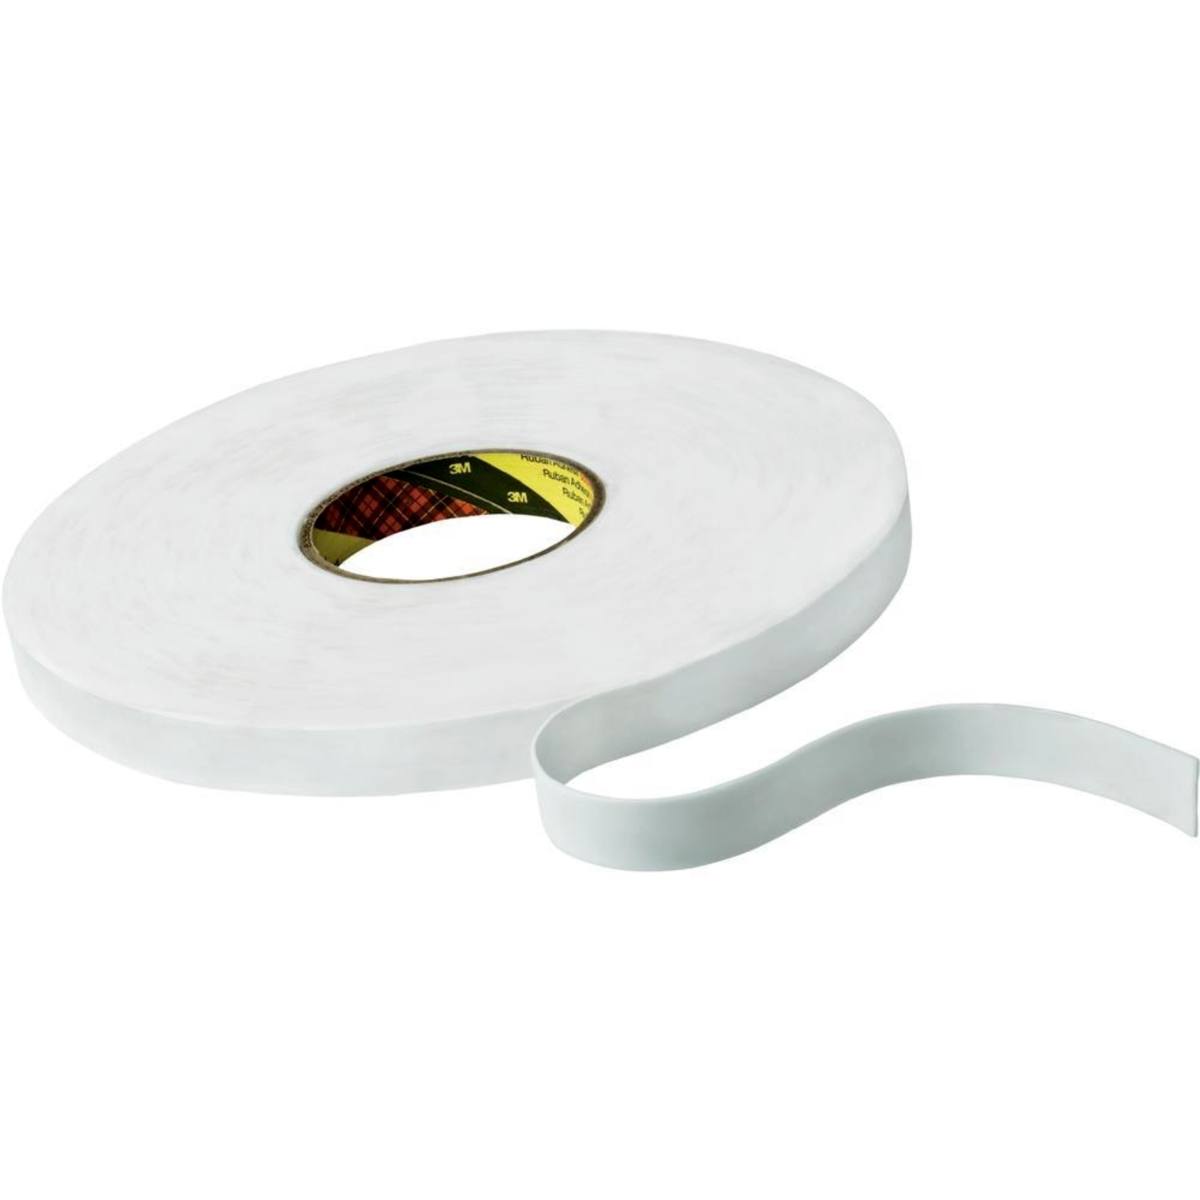 3M PE foam adhesive tape with acrylic adhesive 9546, white, 25 mm x 66 m, 1.1 mm